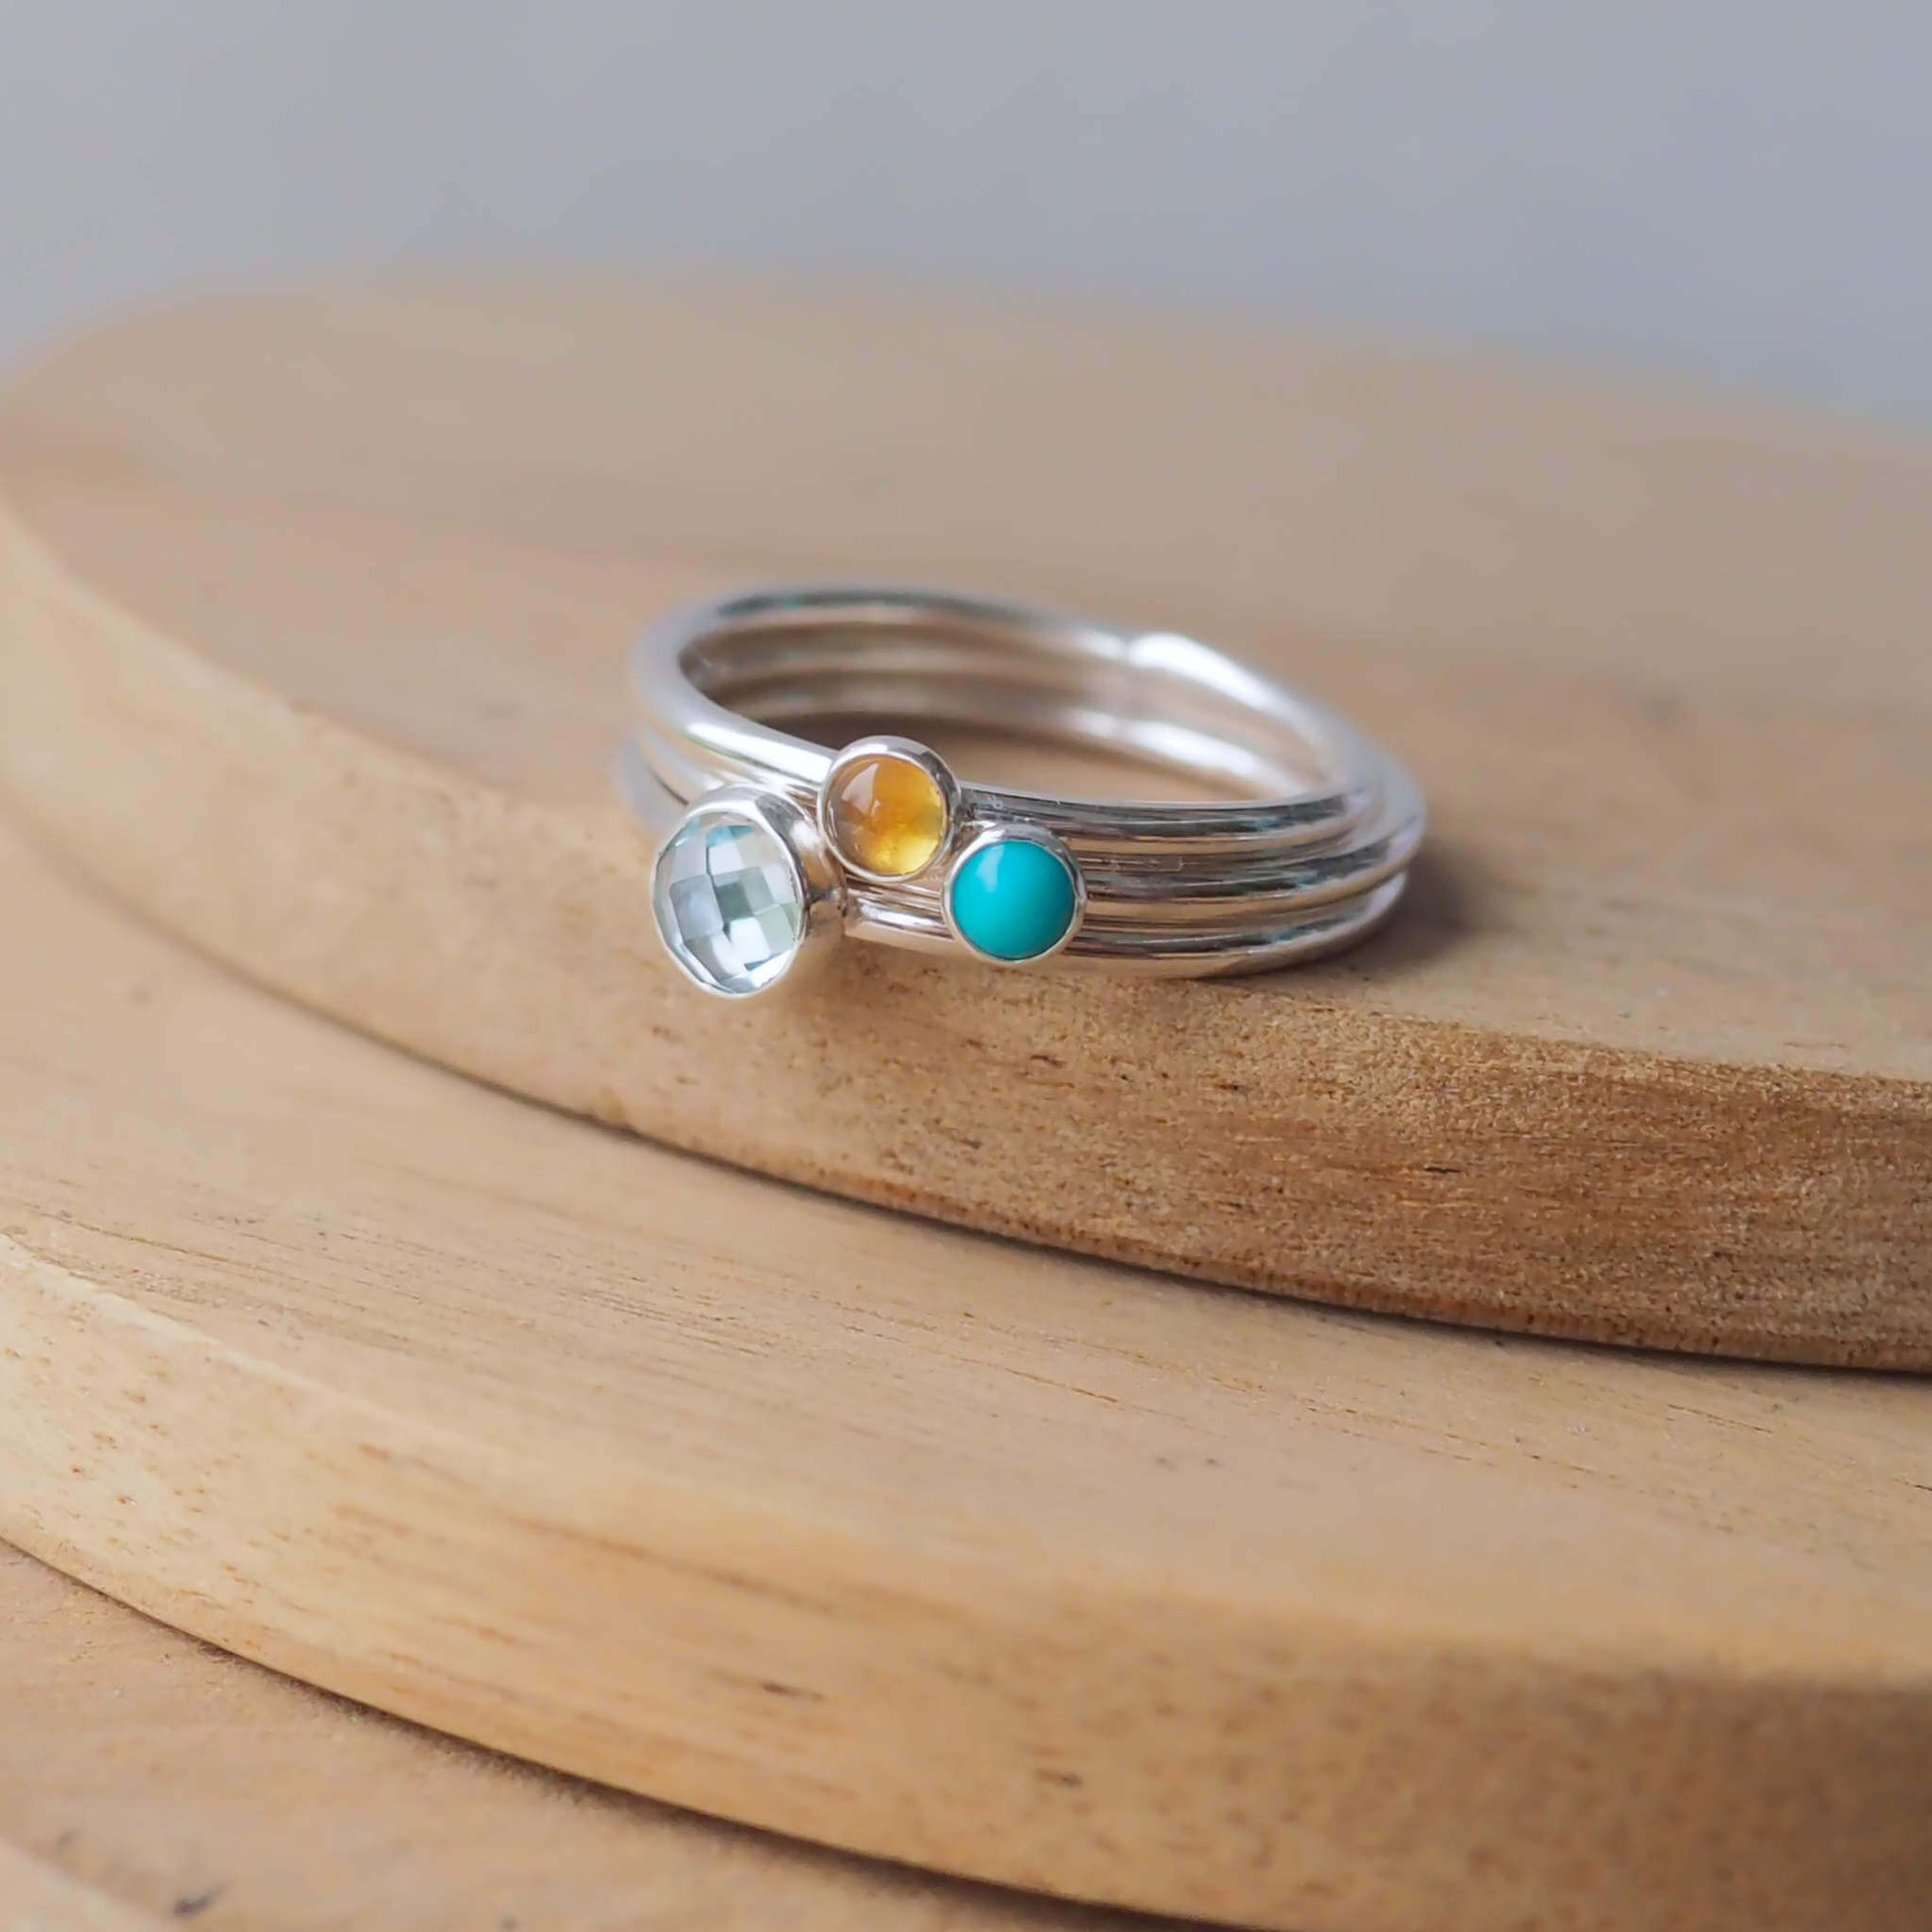 Three Birthstone RIng set with Blue Topaz, Citrine and Turquoise to mark March, November and December Birthdays. The three rings are made with Sterling Silver and a 5mm blue round cabochon, with two further rings with 3mm round gems in a Turquoise and yellow citrine. Handmade in Scotland by maram jewellery